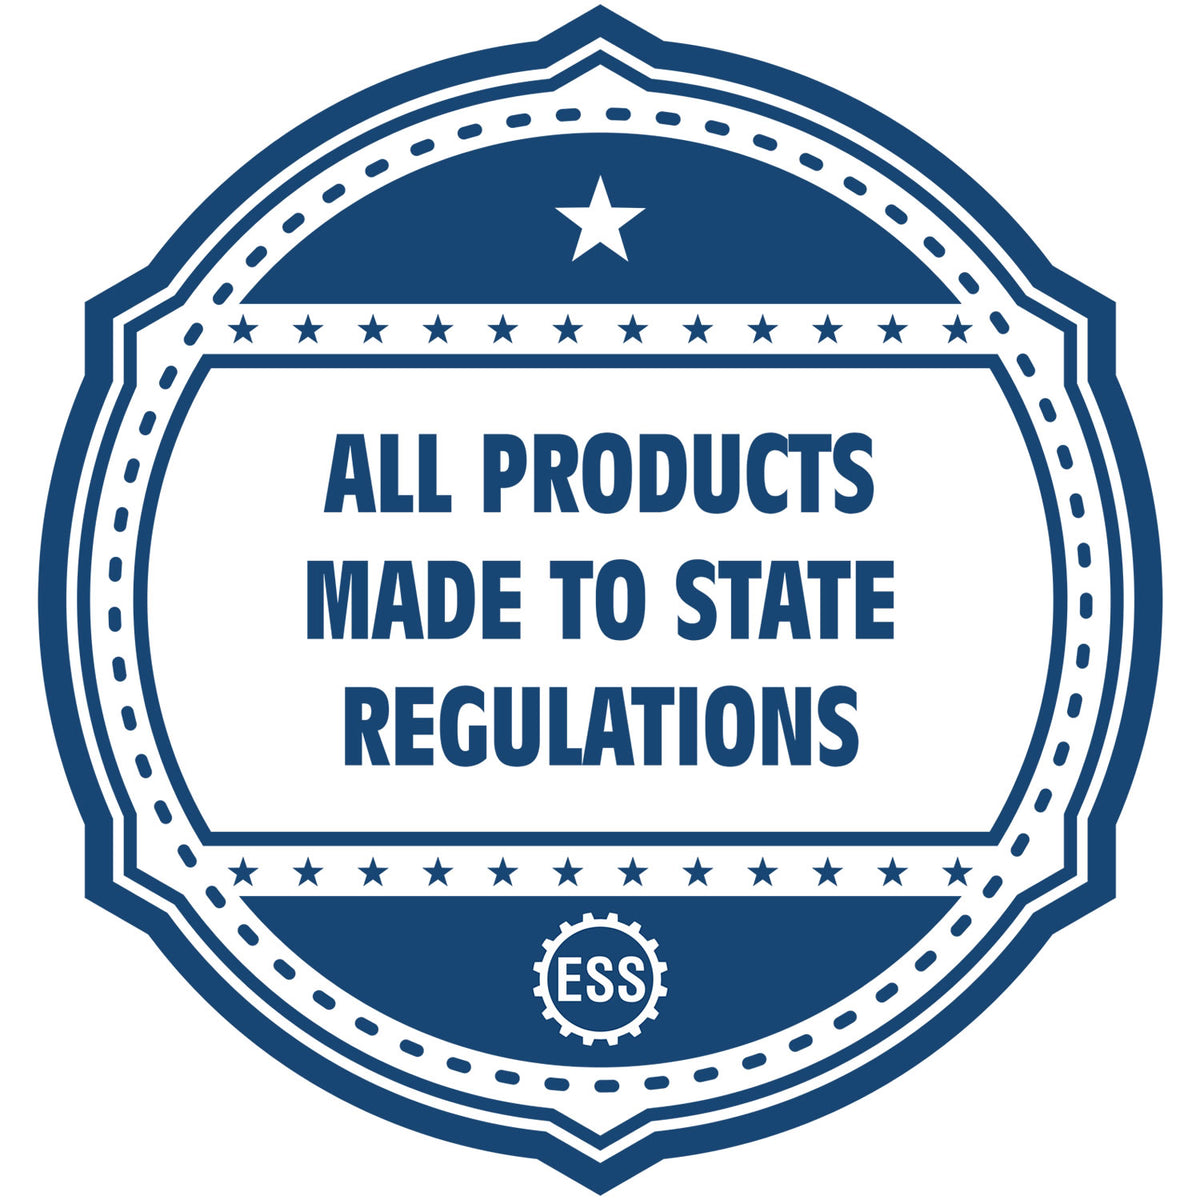 A blue icon or badge for the Hybrid South Carolina Engineer Seal showing that this product is made in compliance with state regulations.